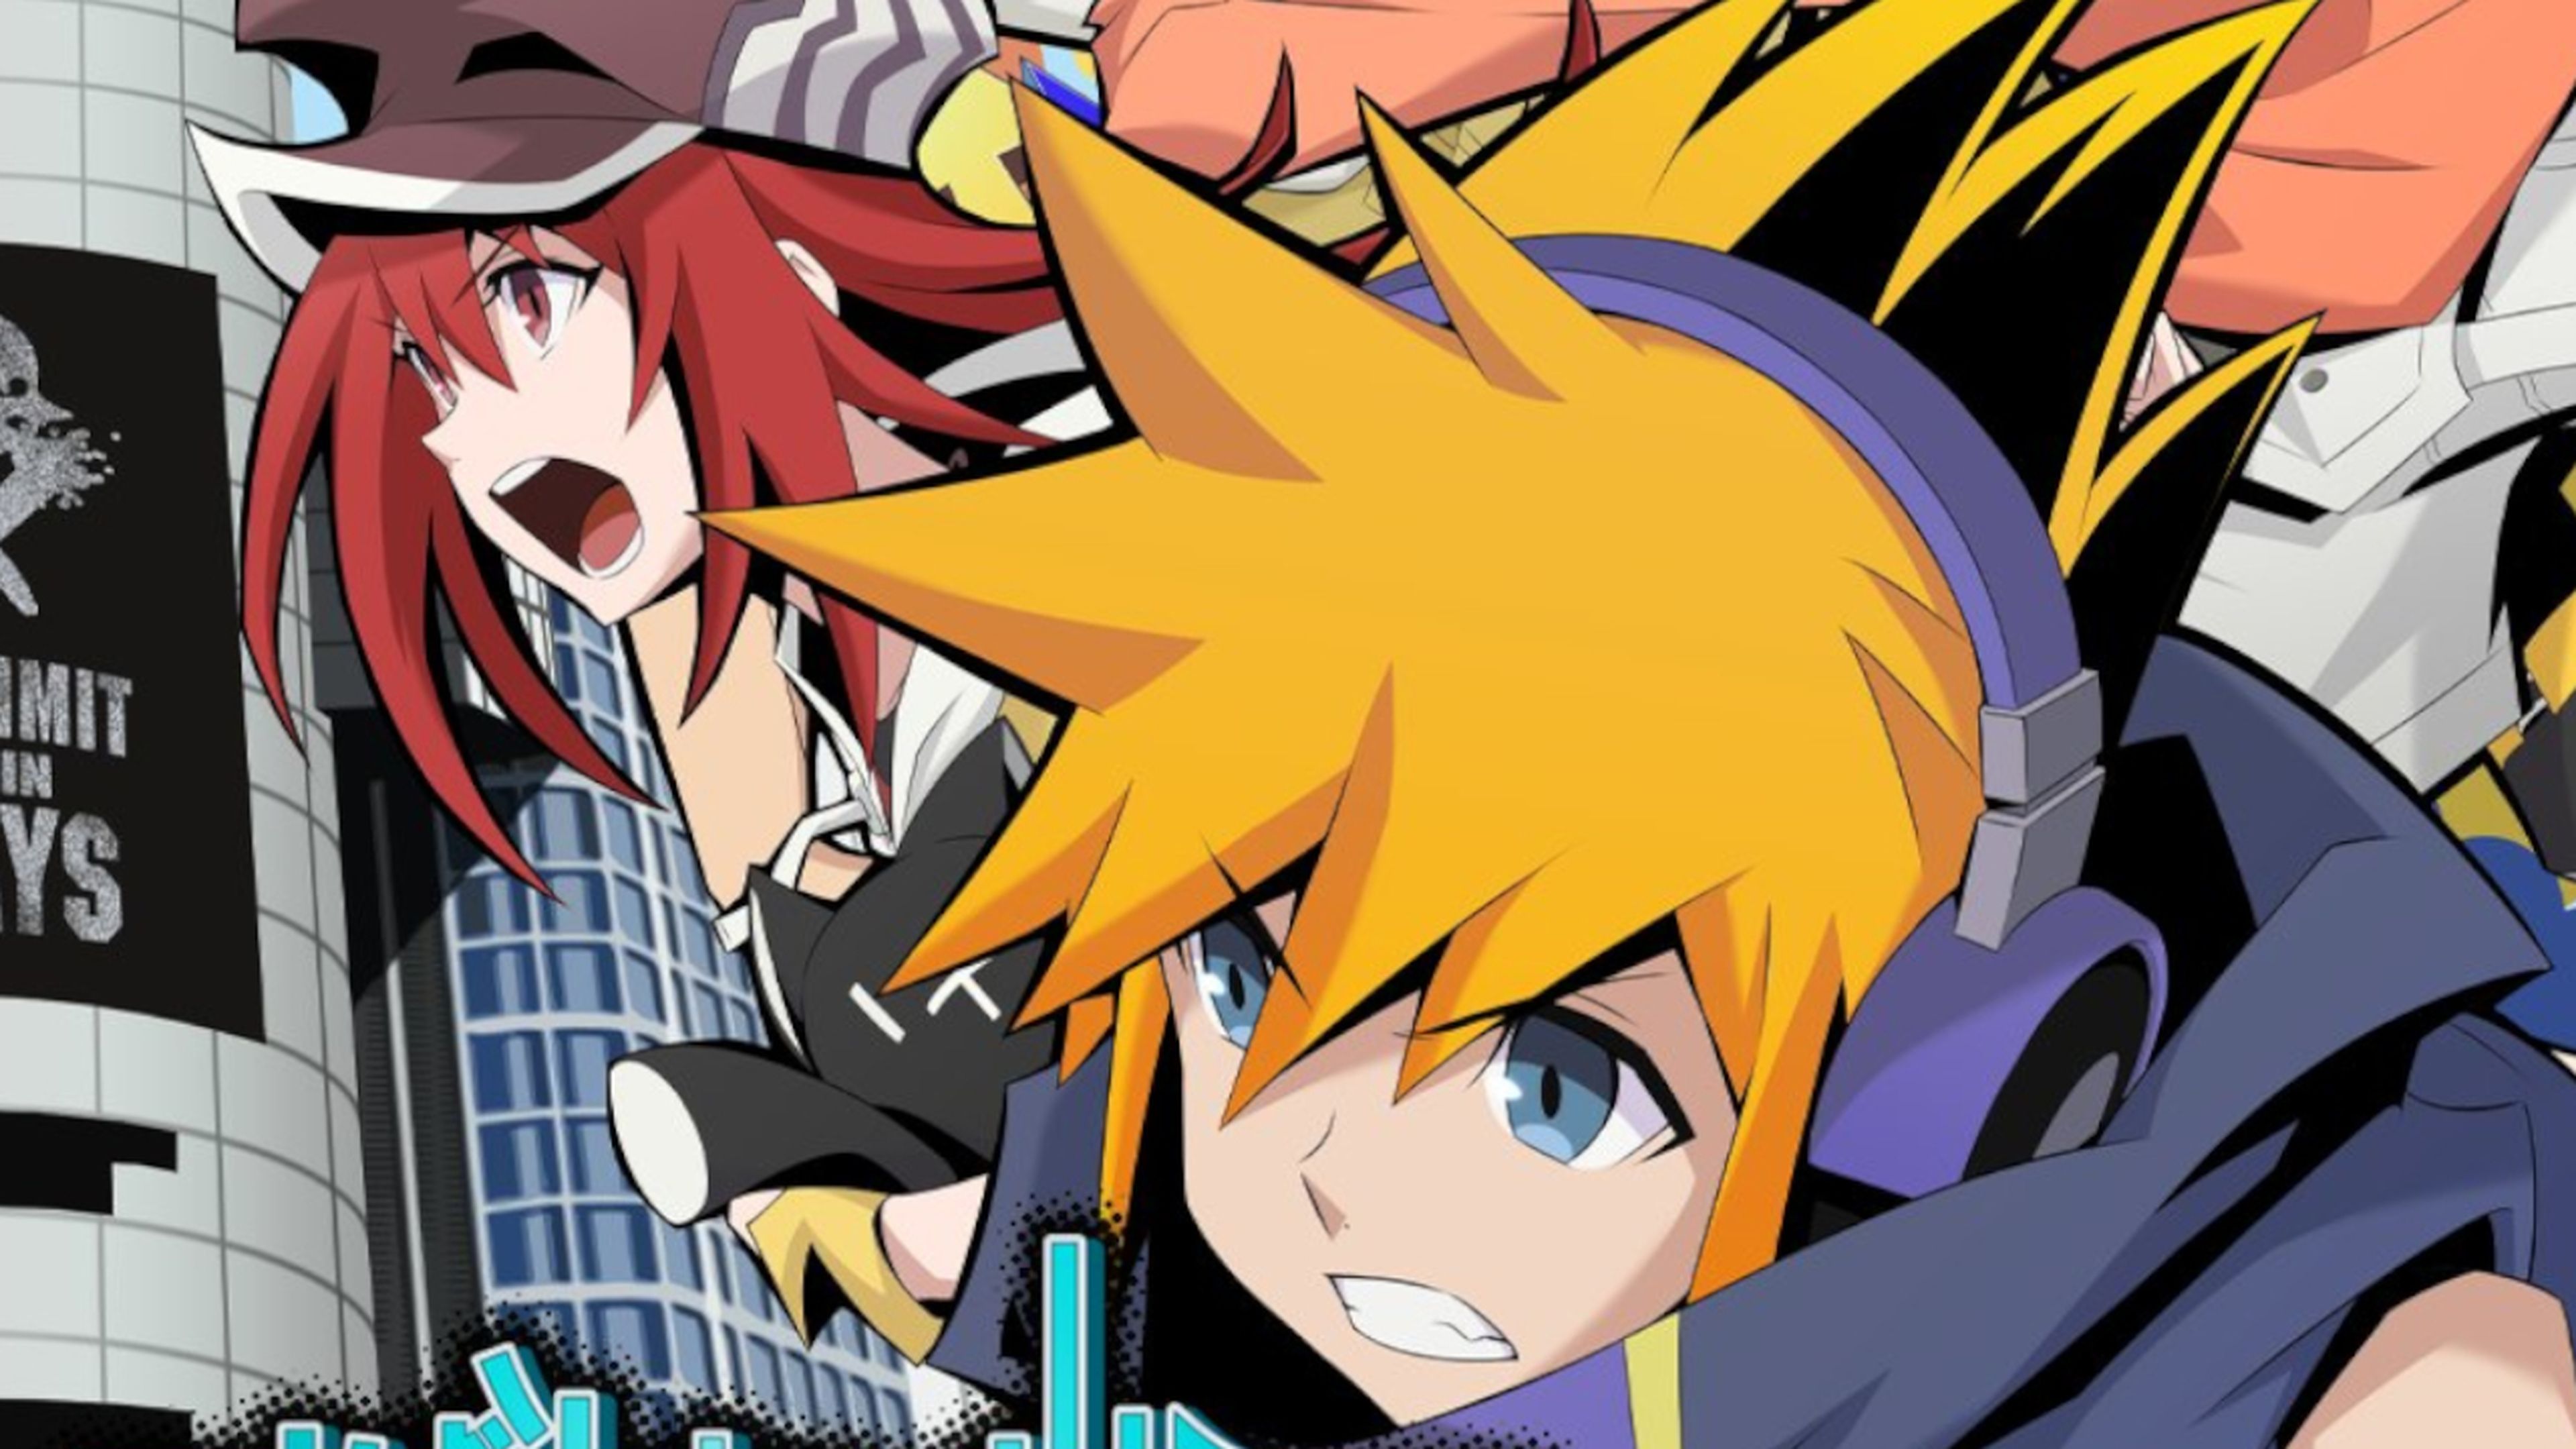 The World Ends With You anime